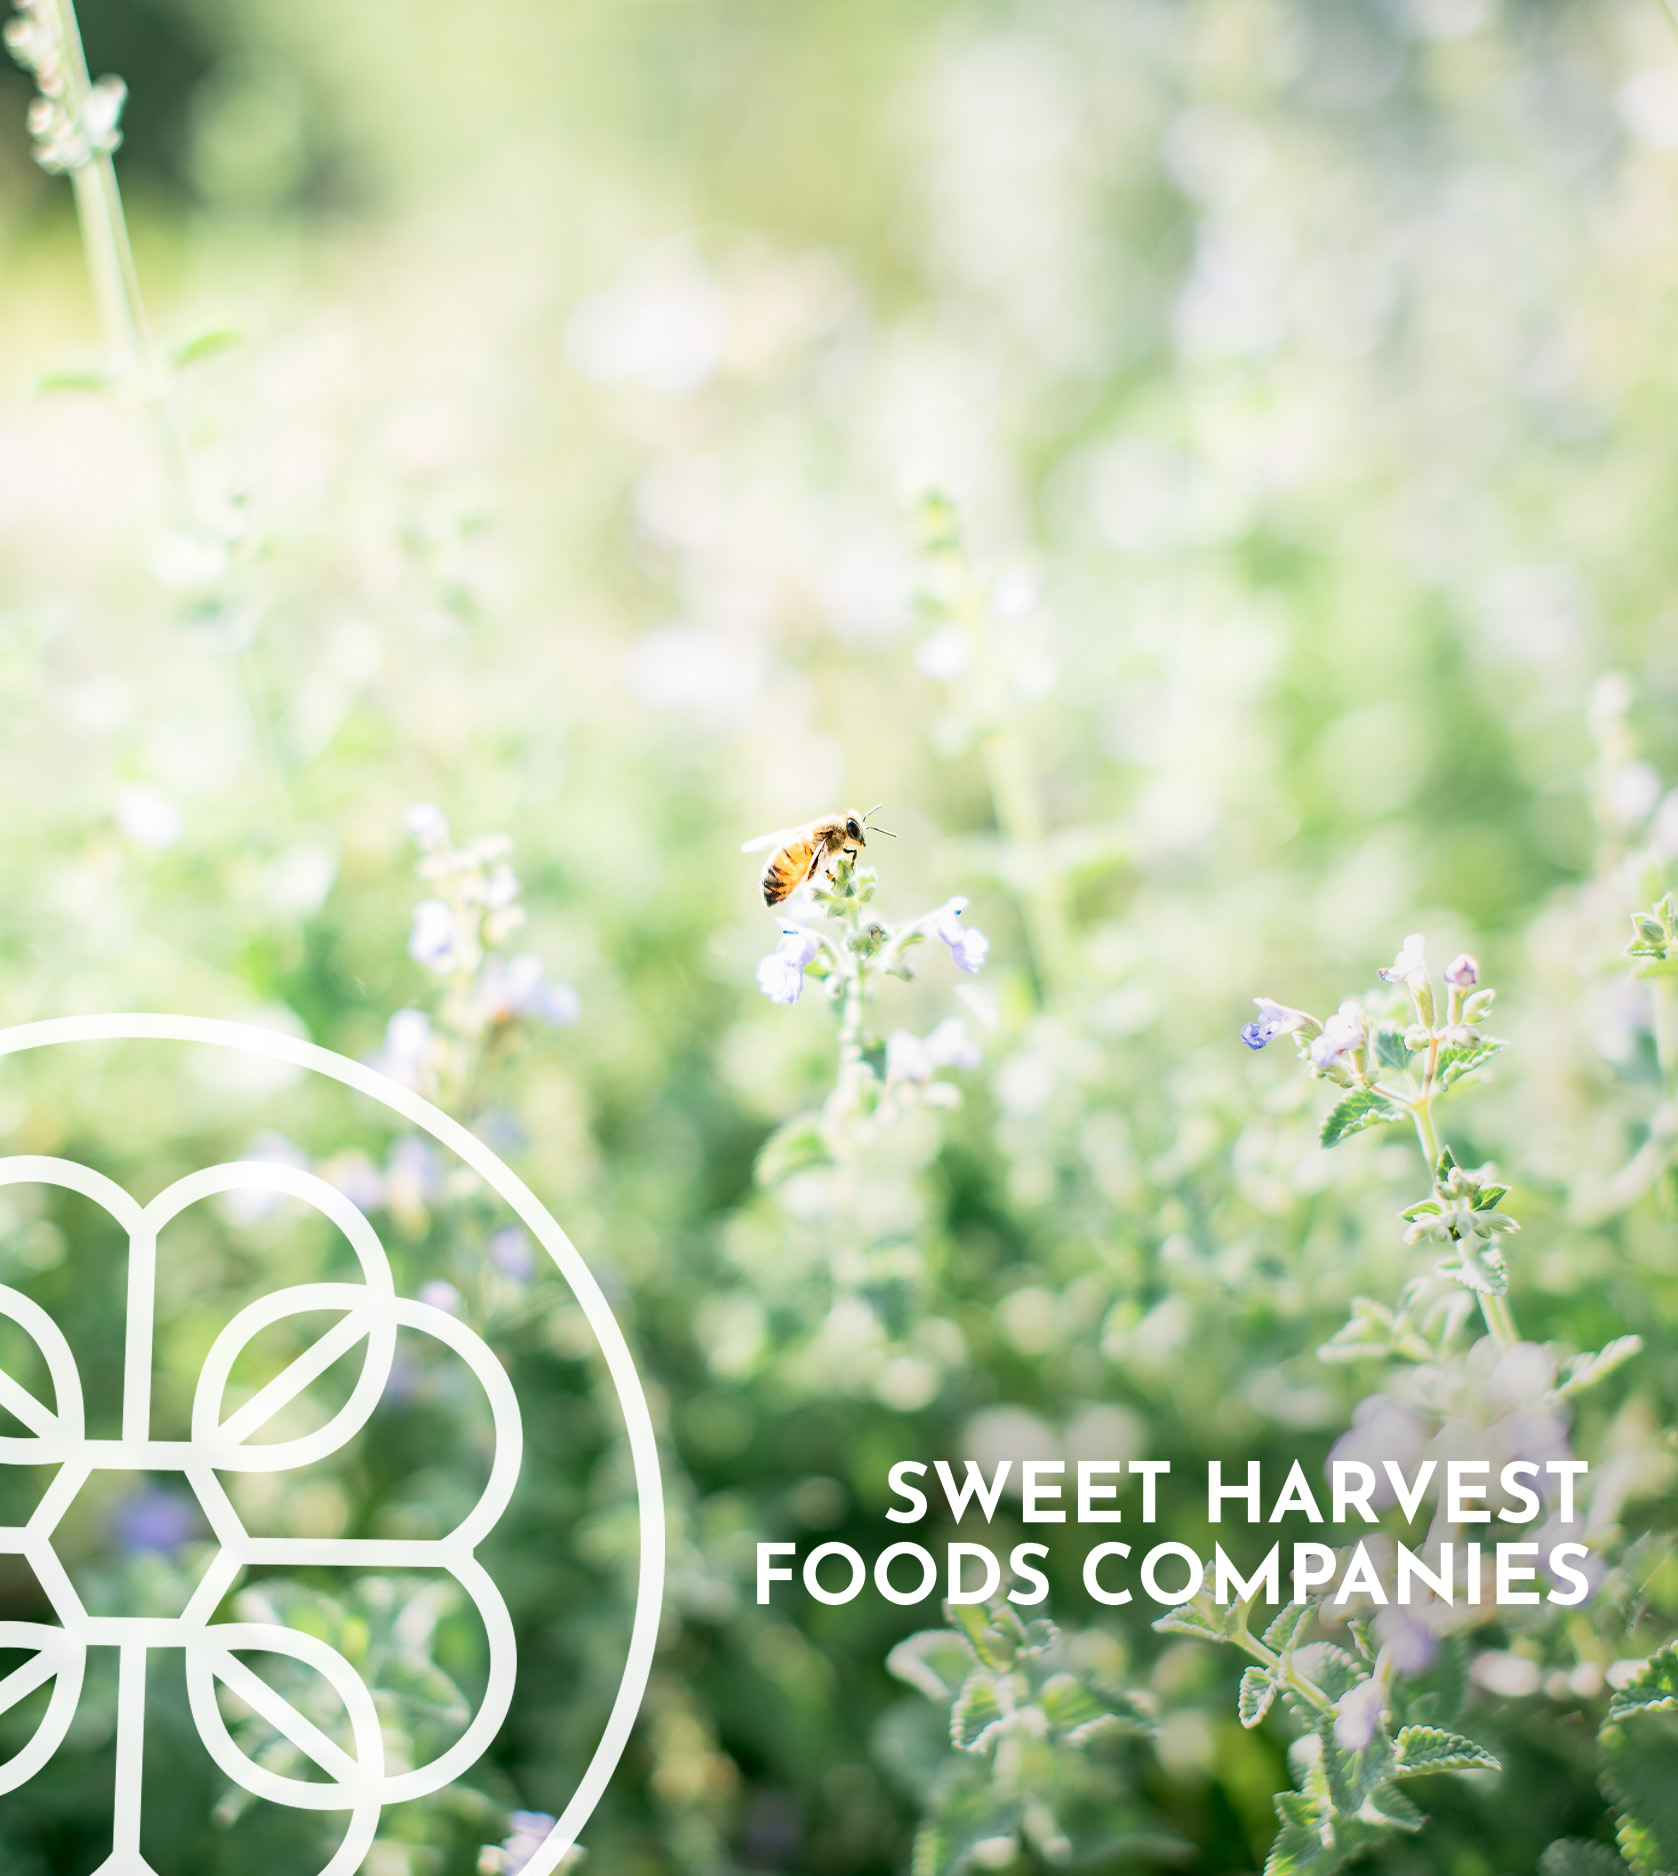 A bee hovers over a floral field with the Sweet Harvest Foods Companies logo overlay